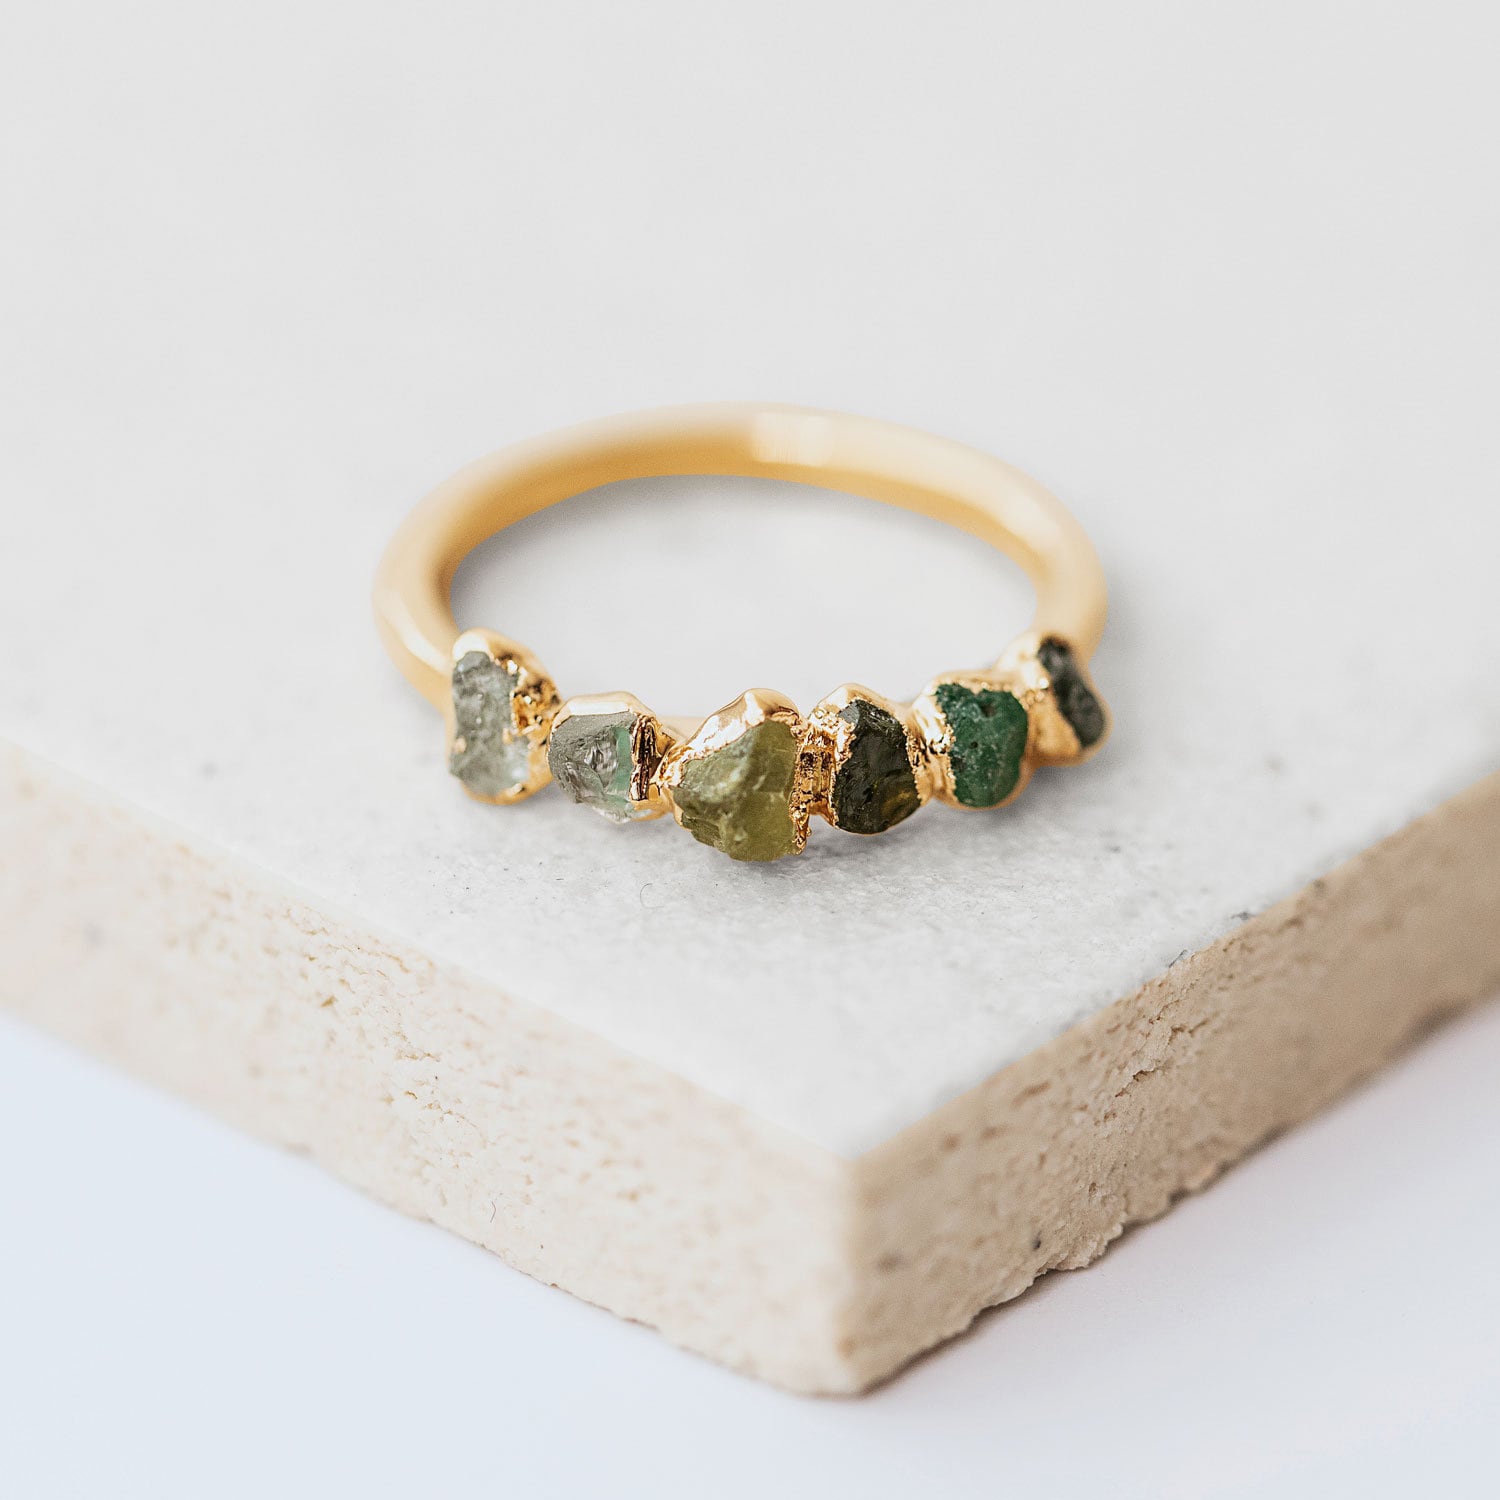 raw emerald ring raw peridot jewelry green stacking ring unique gemstone ring green tourmaline ring ombre ring multi-stone gold band Sieraden Ringen Statementringen 